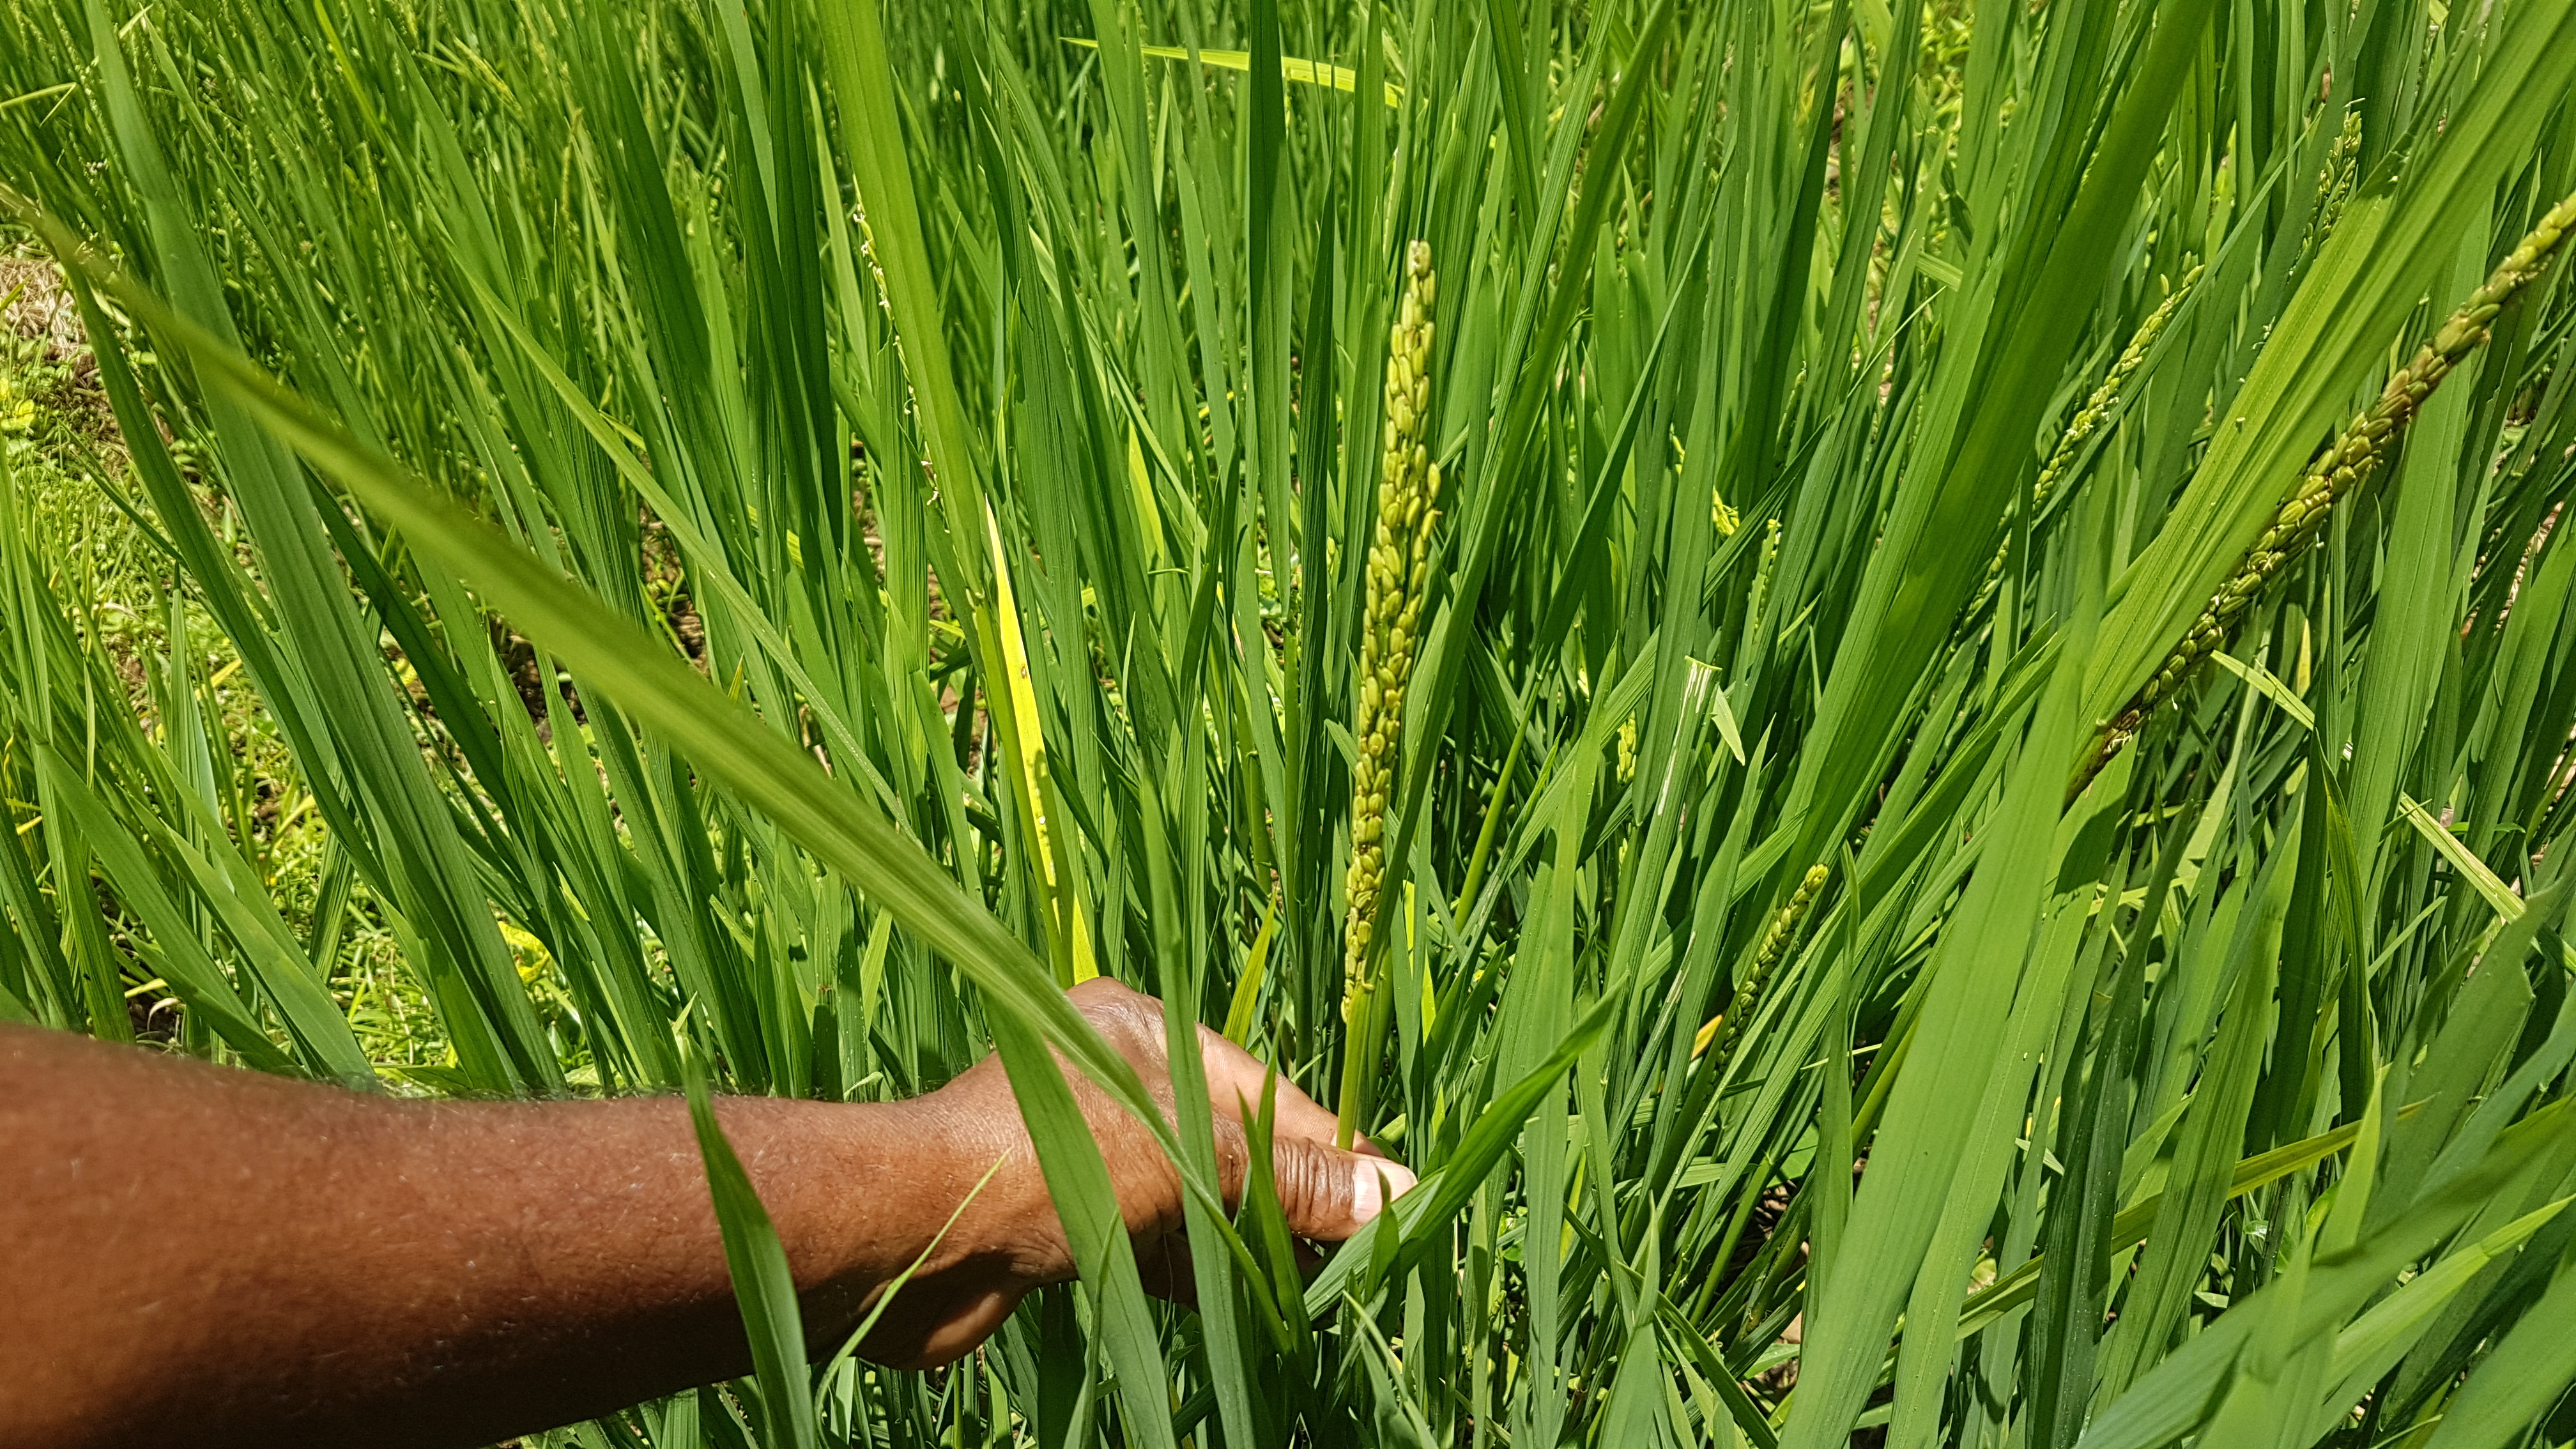 ”For all this green, you can count the amount of grain-bearing stalks on one hand. Also the season has shifted, because we got fertiliser late, that means the paddy is in a stage where, if there is one strong rain, we will lose the crop. And I feel like there is going to be rain in a few days.”